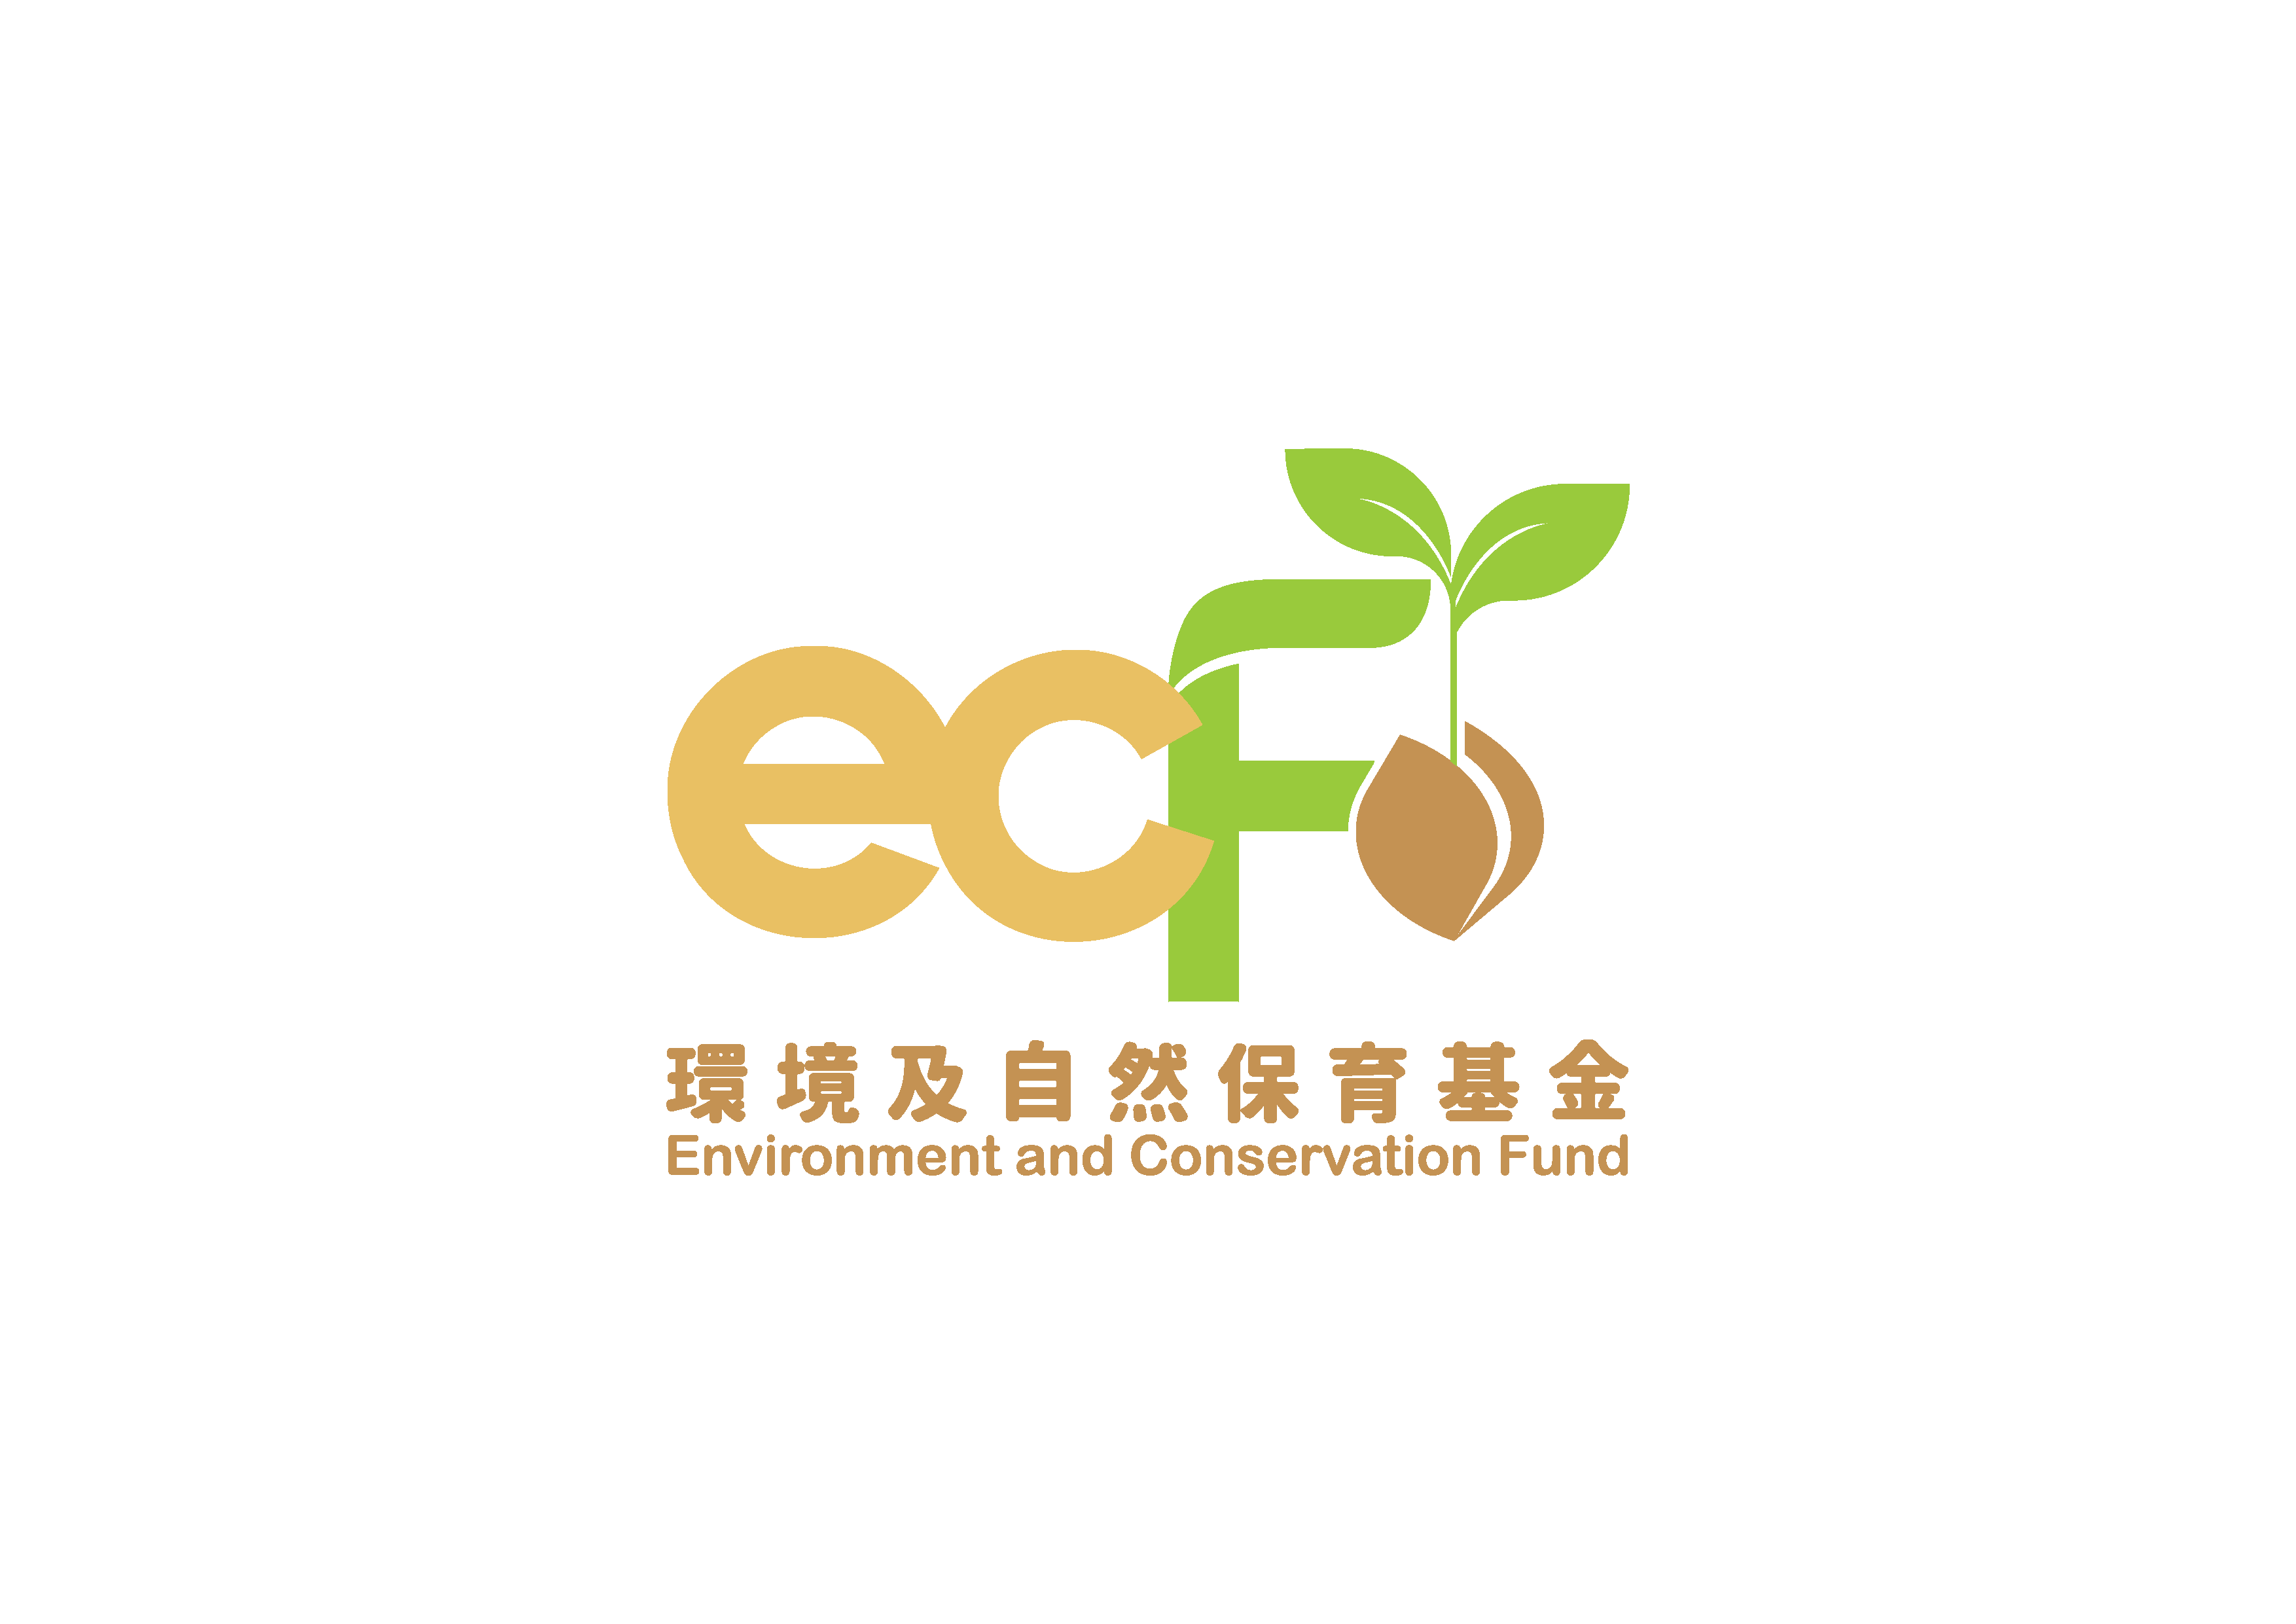 Environment and Conservation Fund (ECF) logo